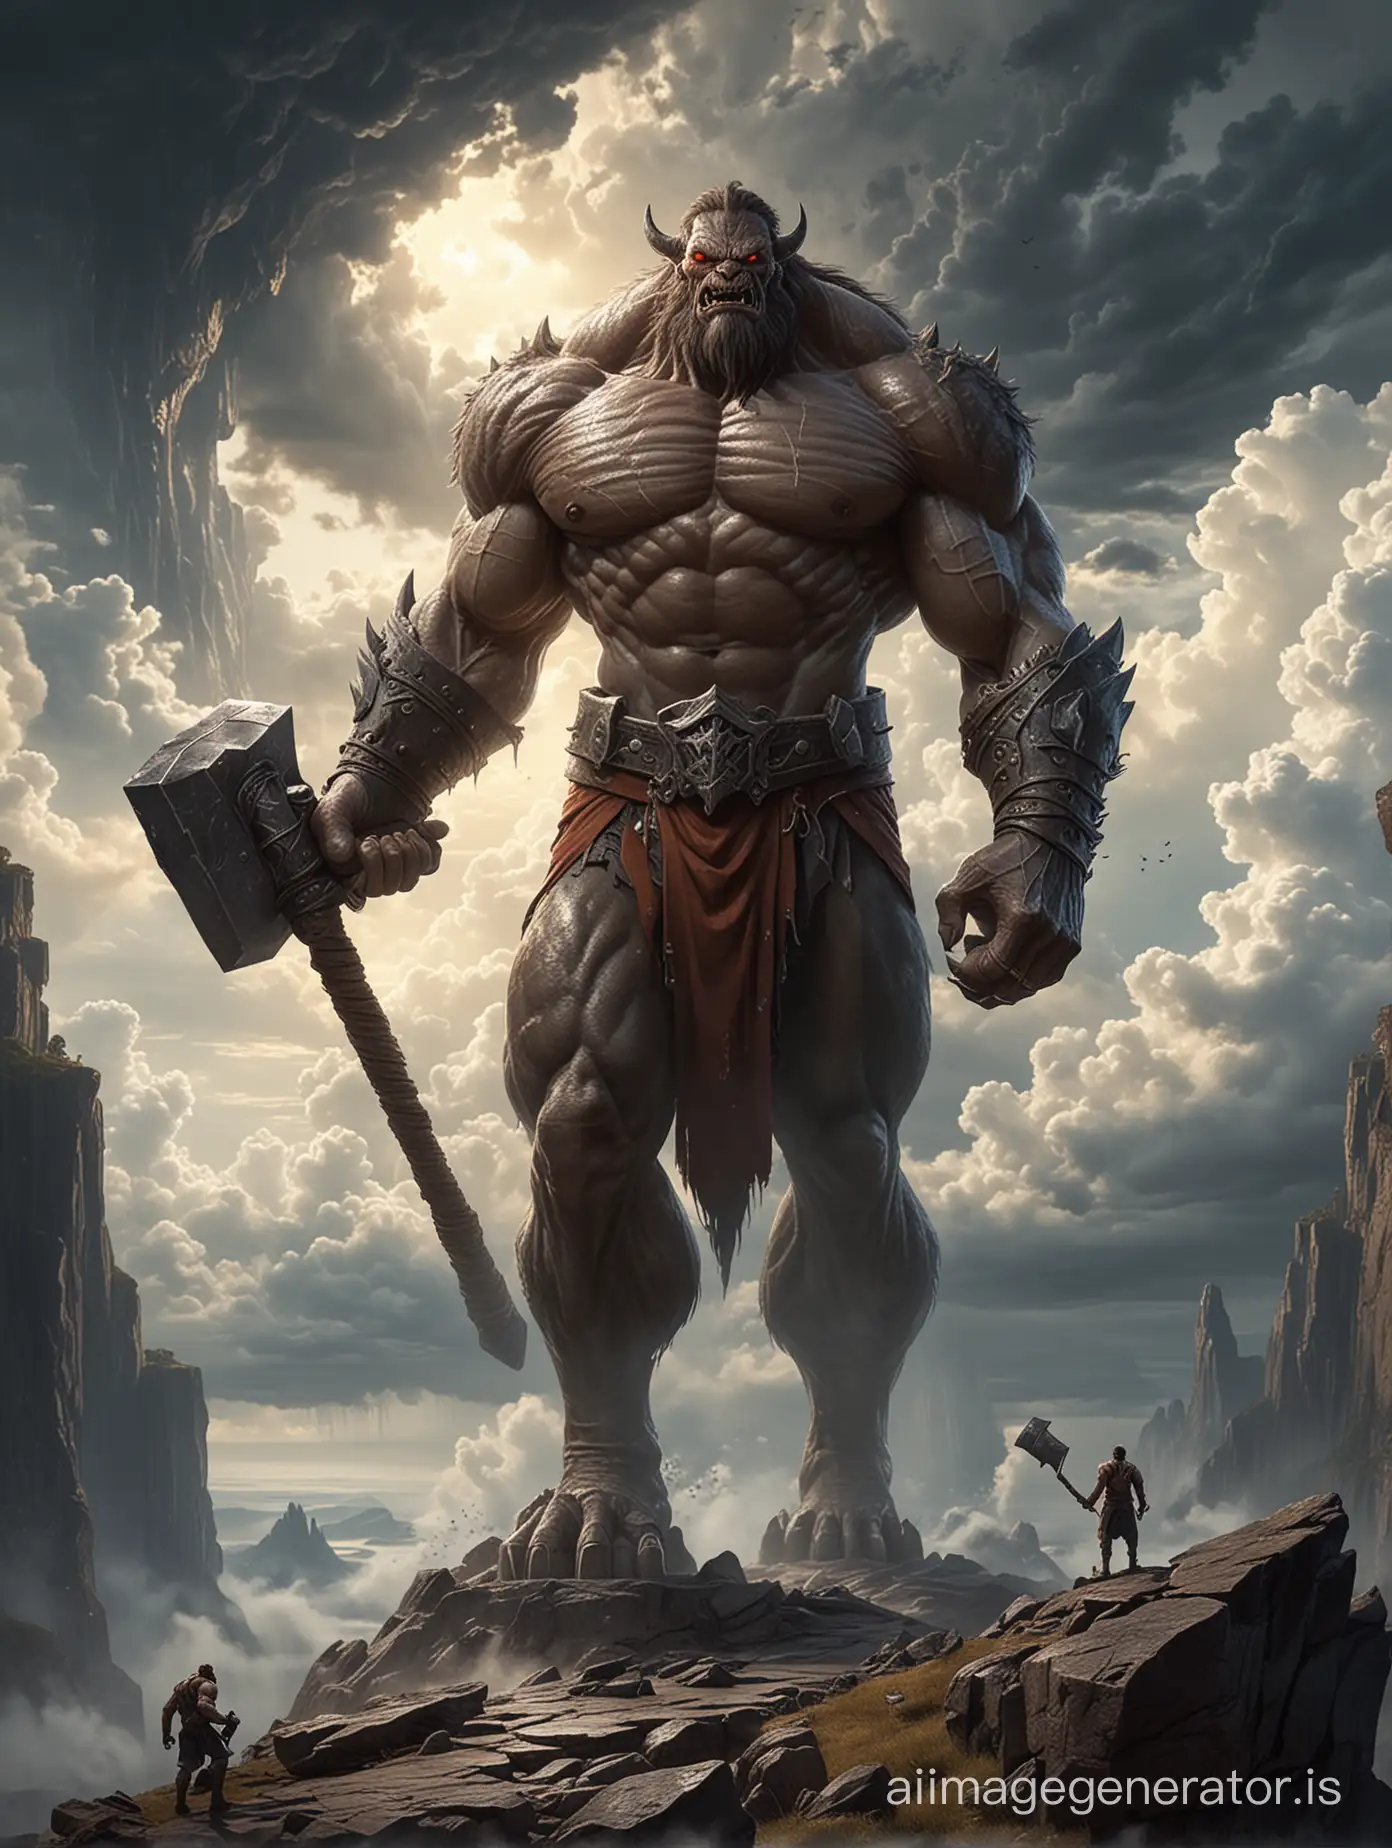 Majestic-Monster-with-Iron-Hammer-on-Cloudy-Cliff